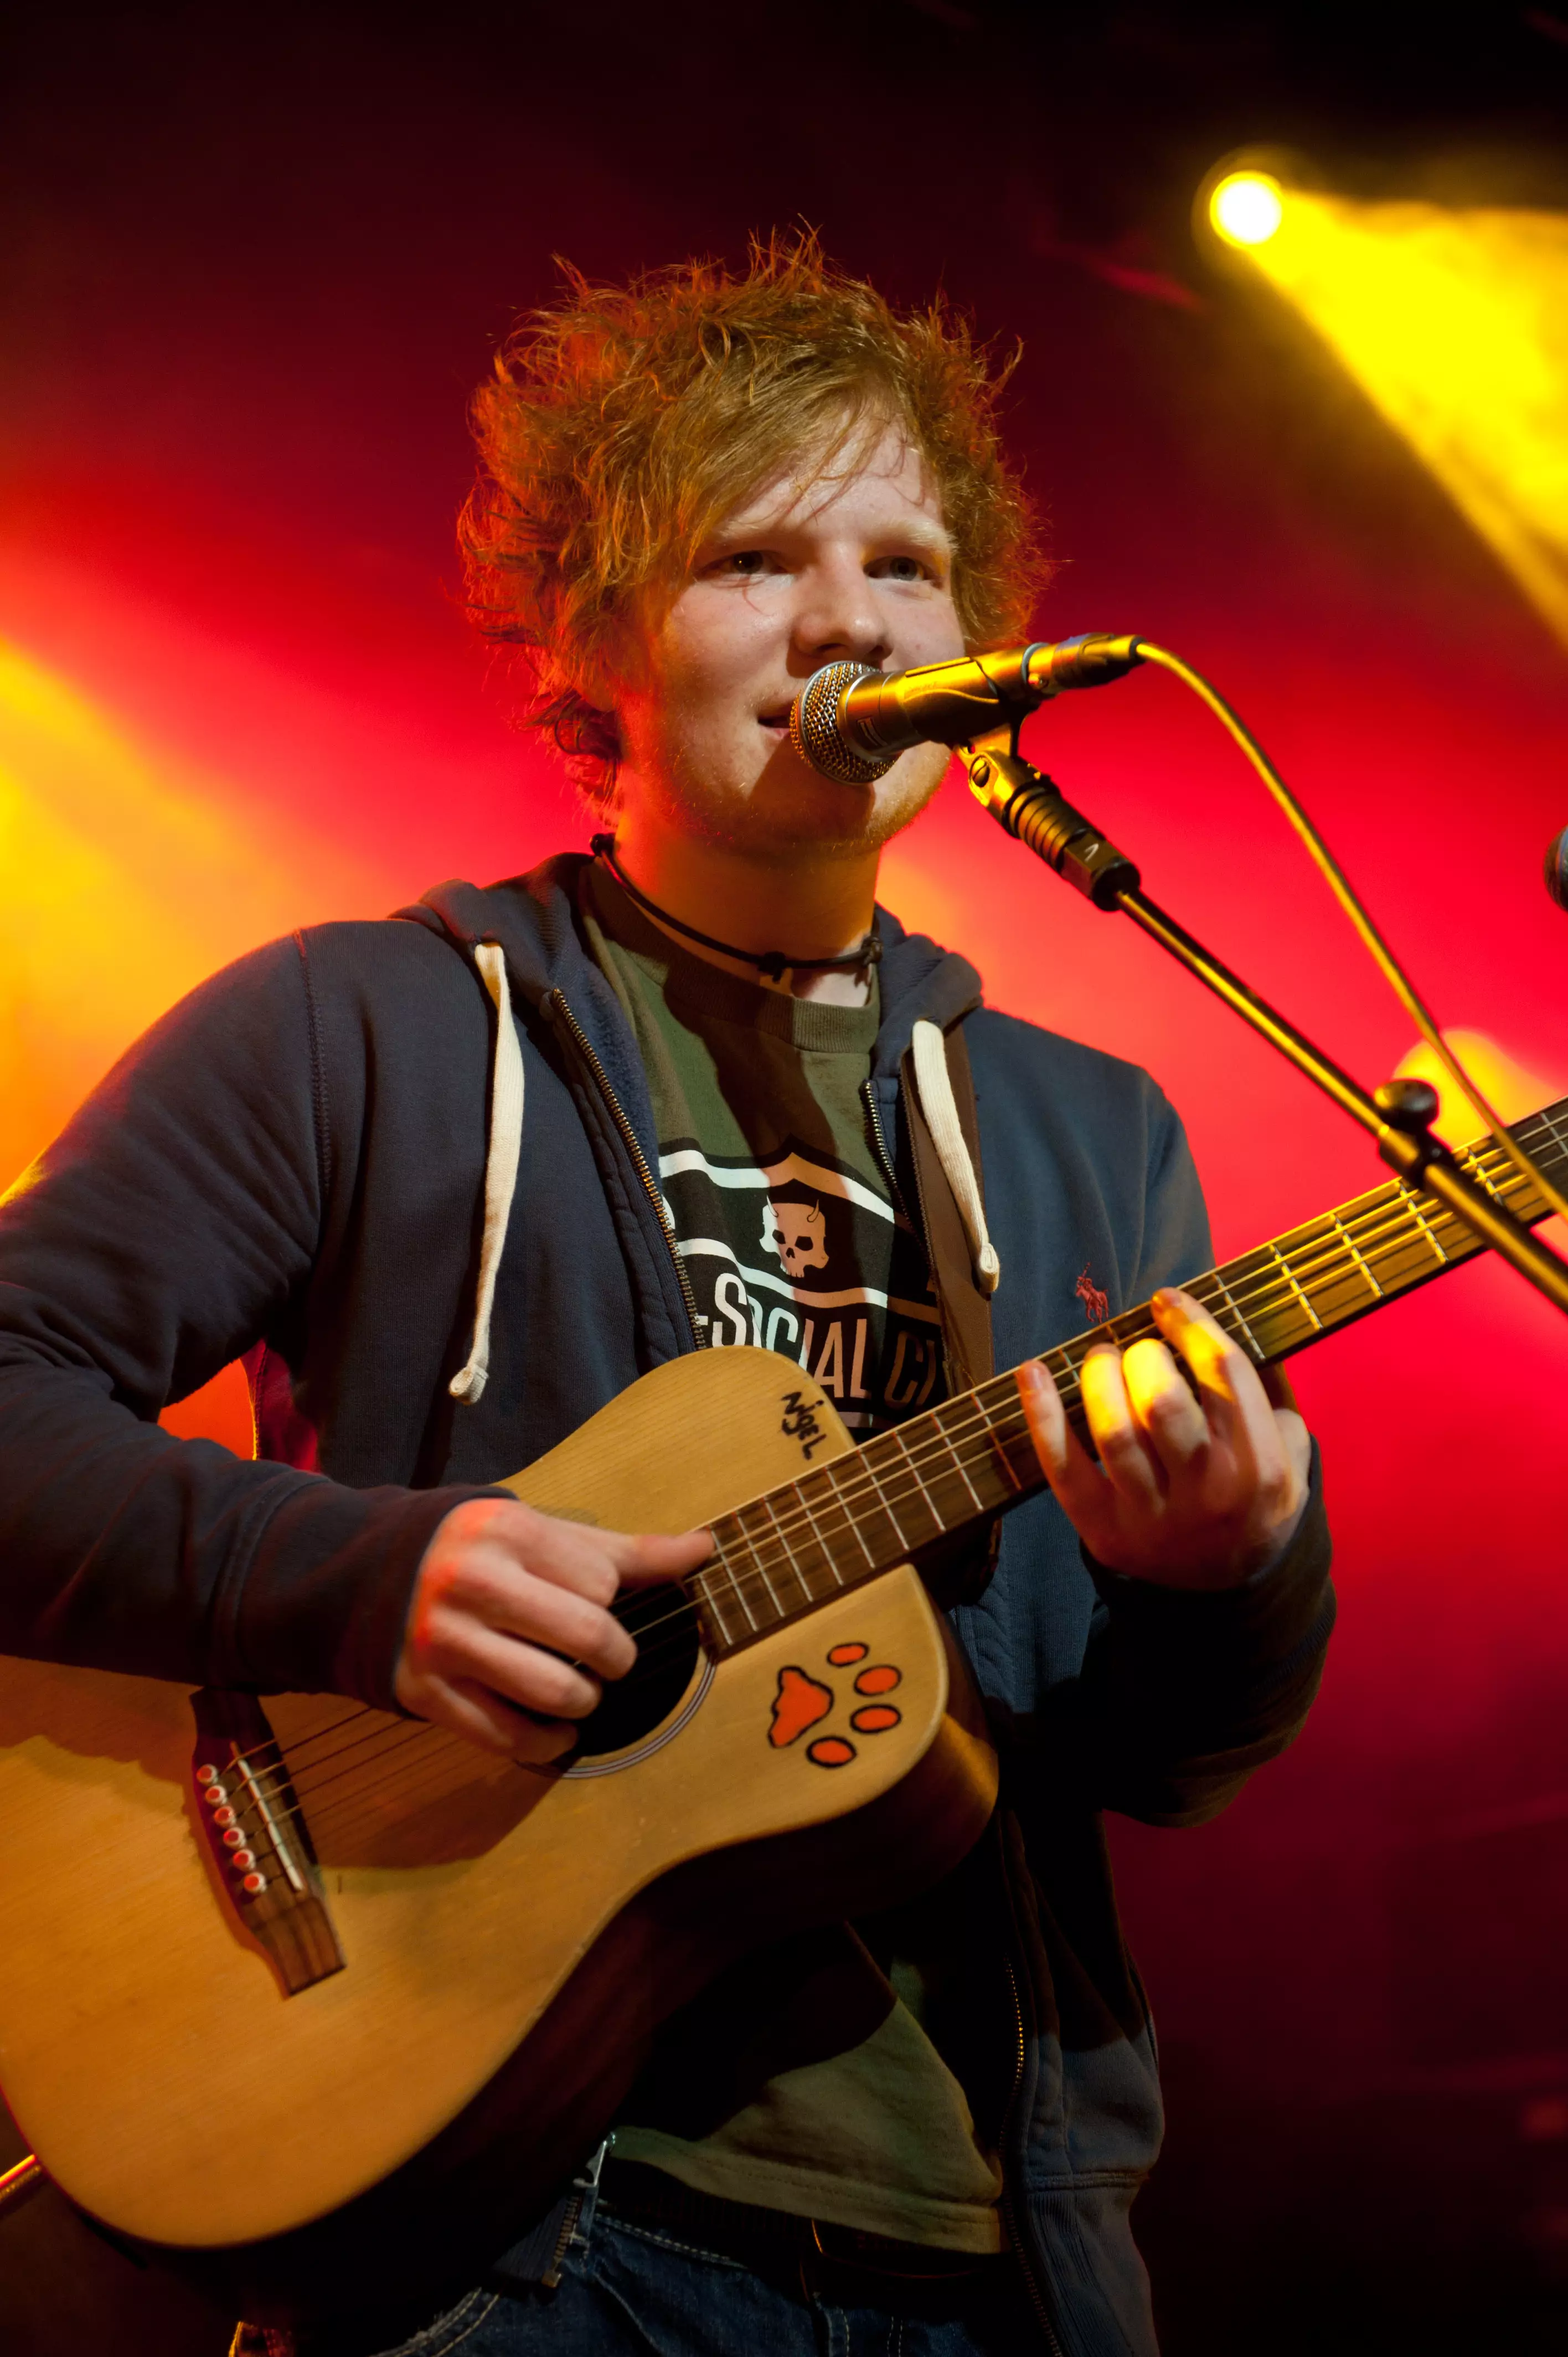 Ed Sheeran often slept rough during his early days.